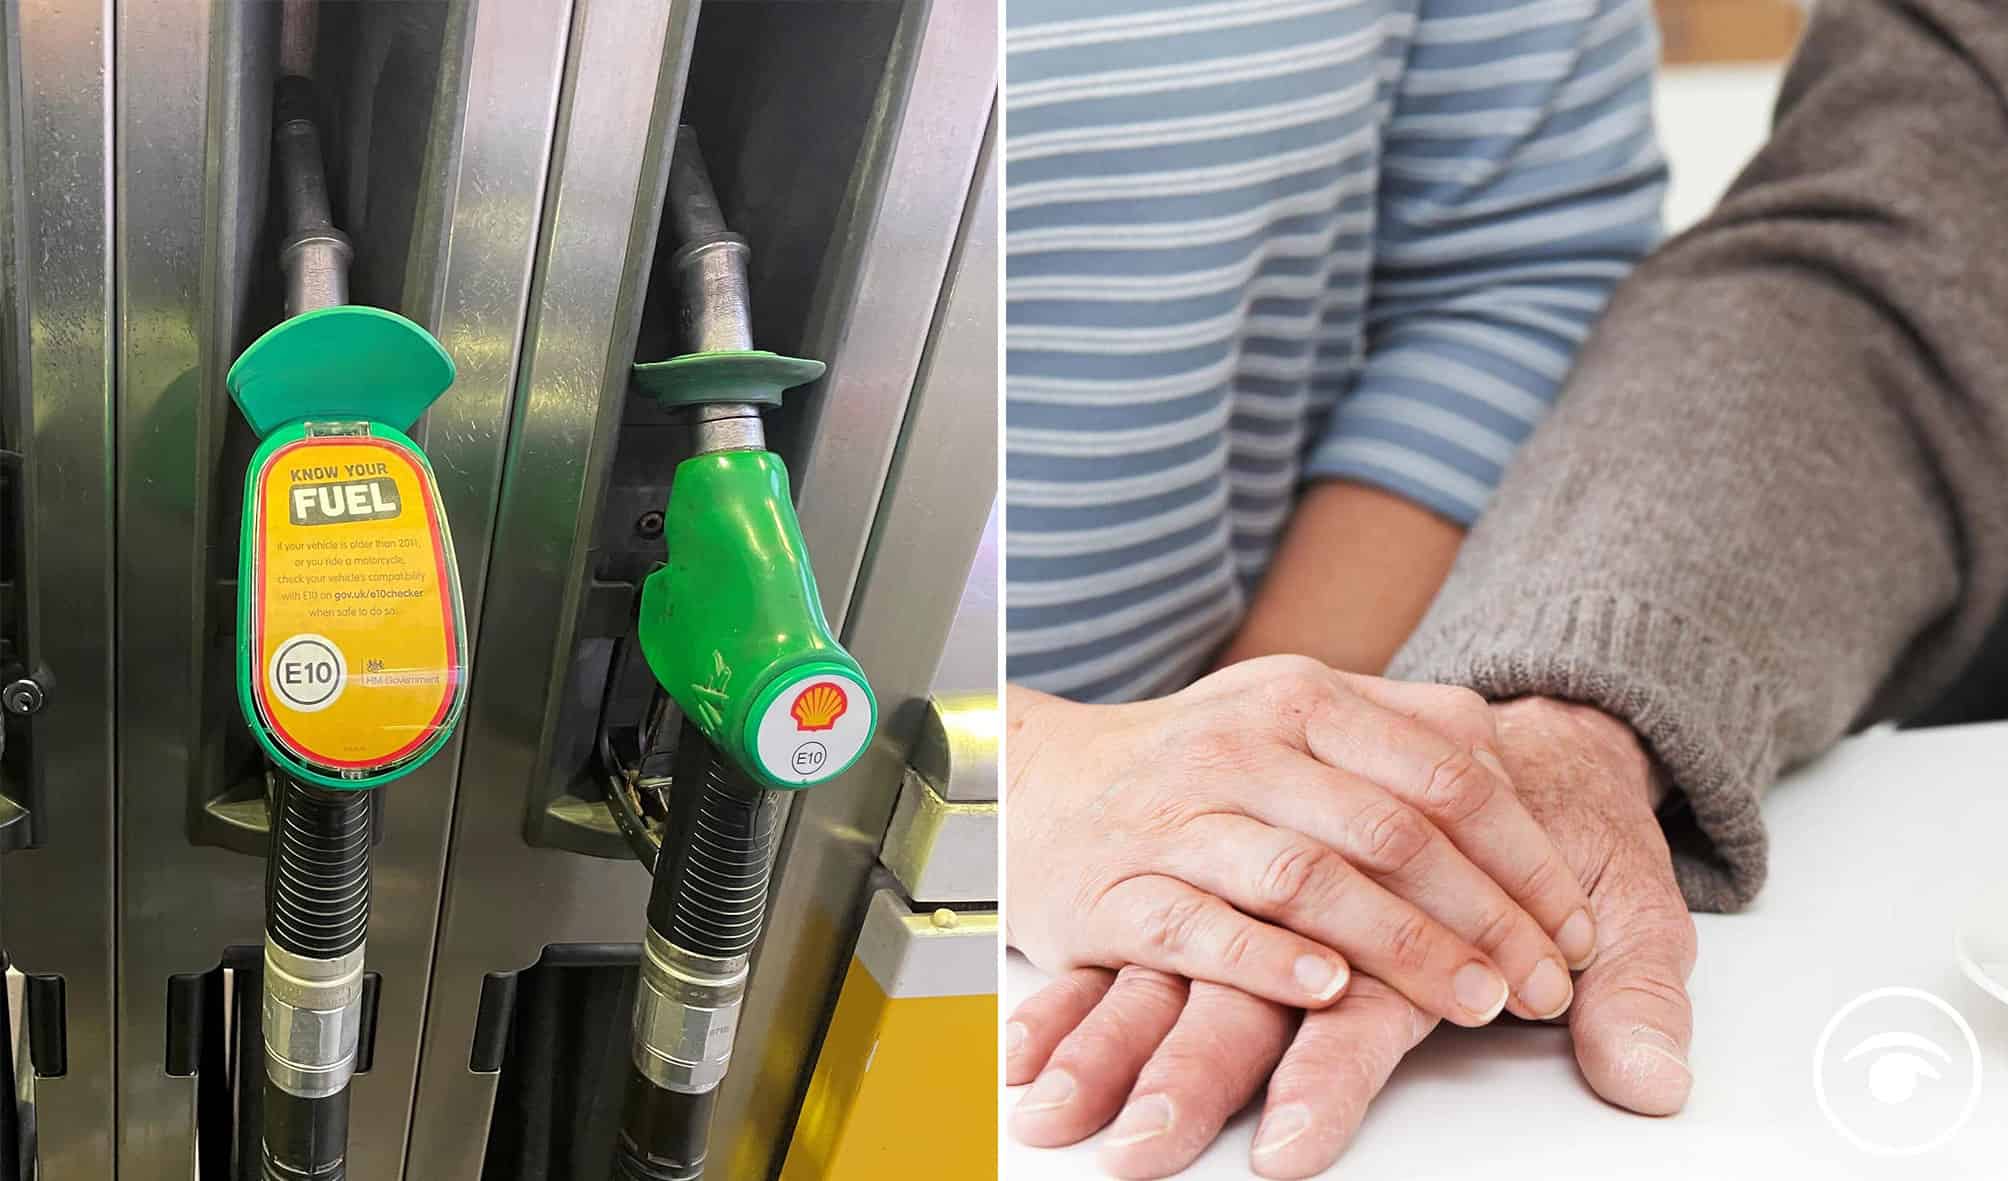 Care workers calling in sick due to fuel costs & drivers told to avoid short journeys as petrol reaches new record high